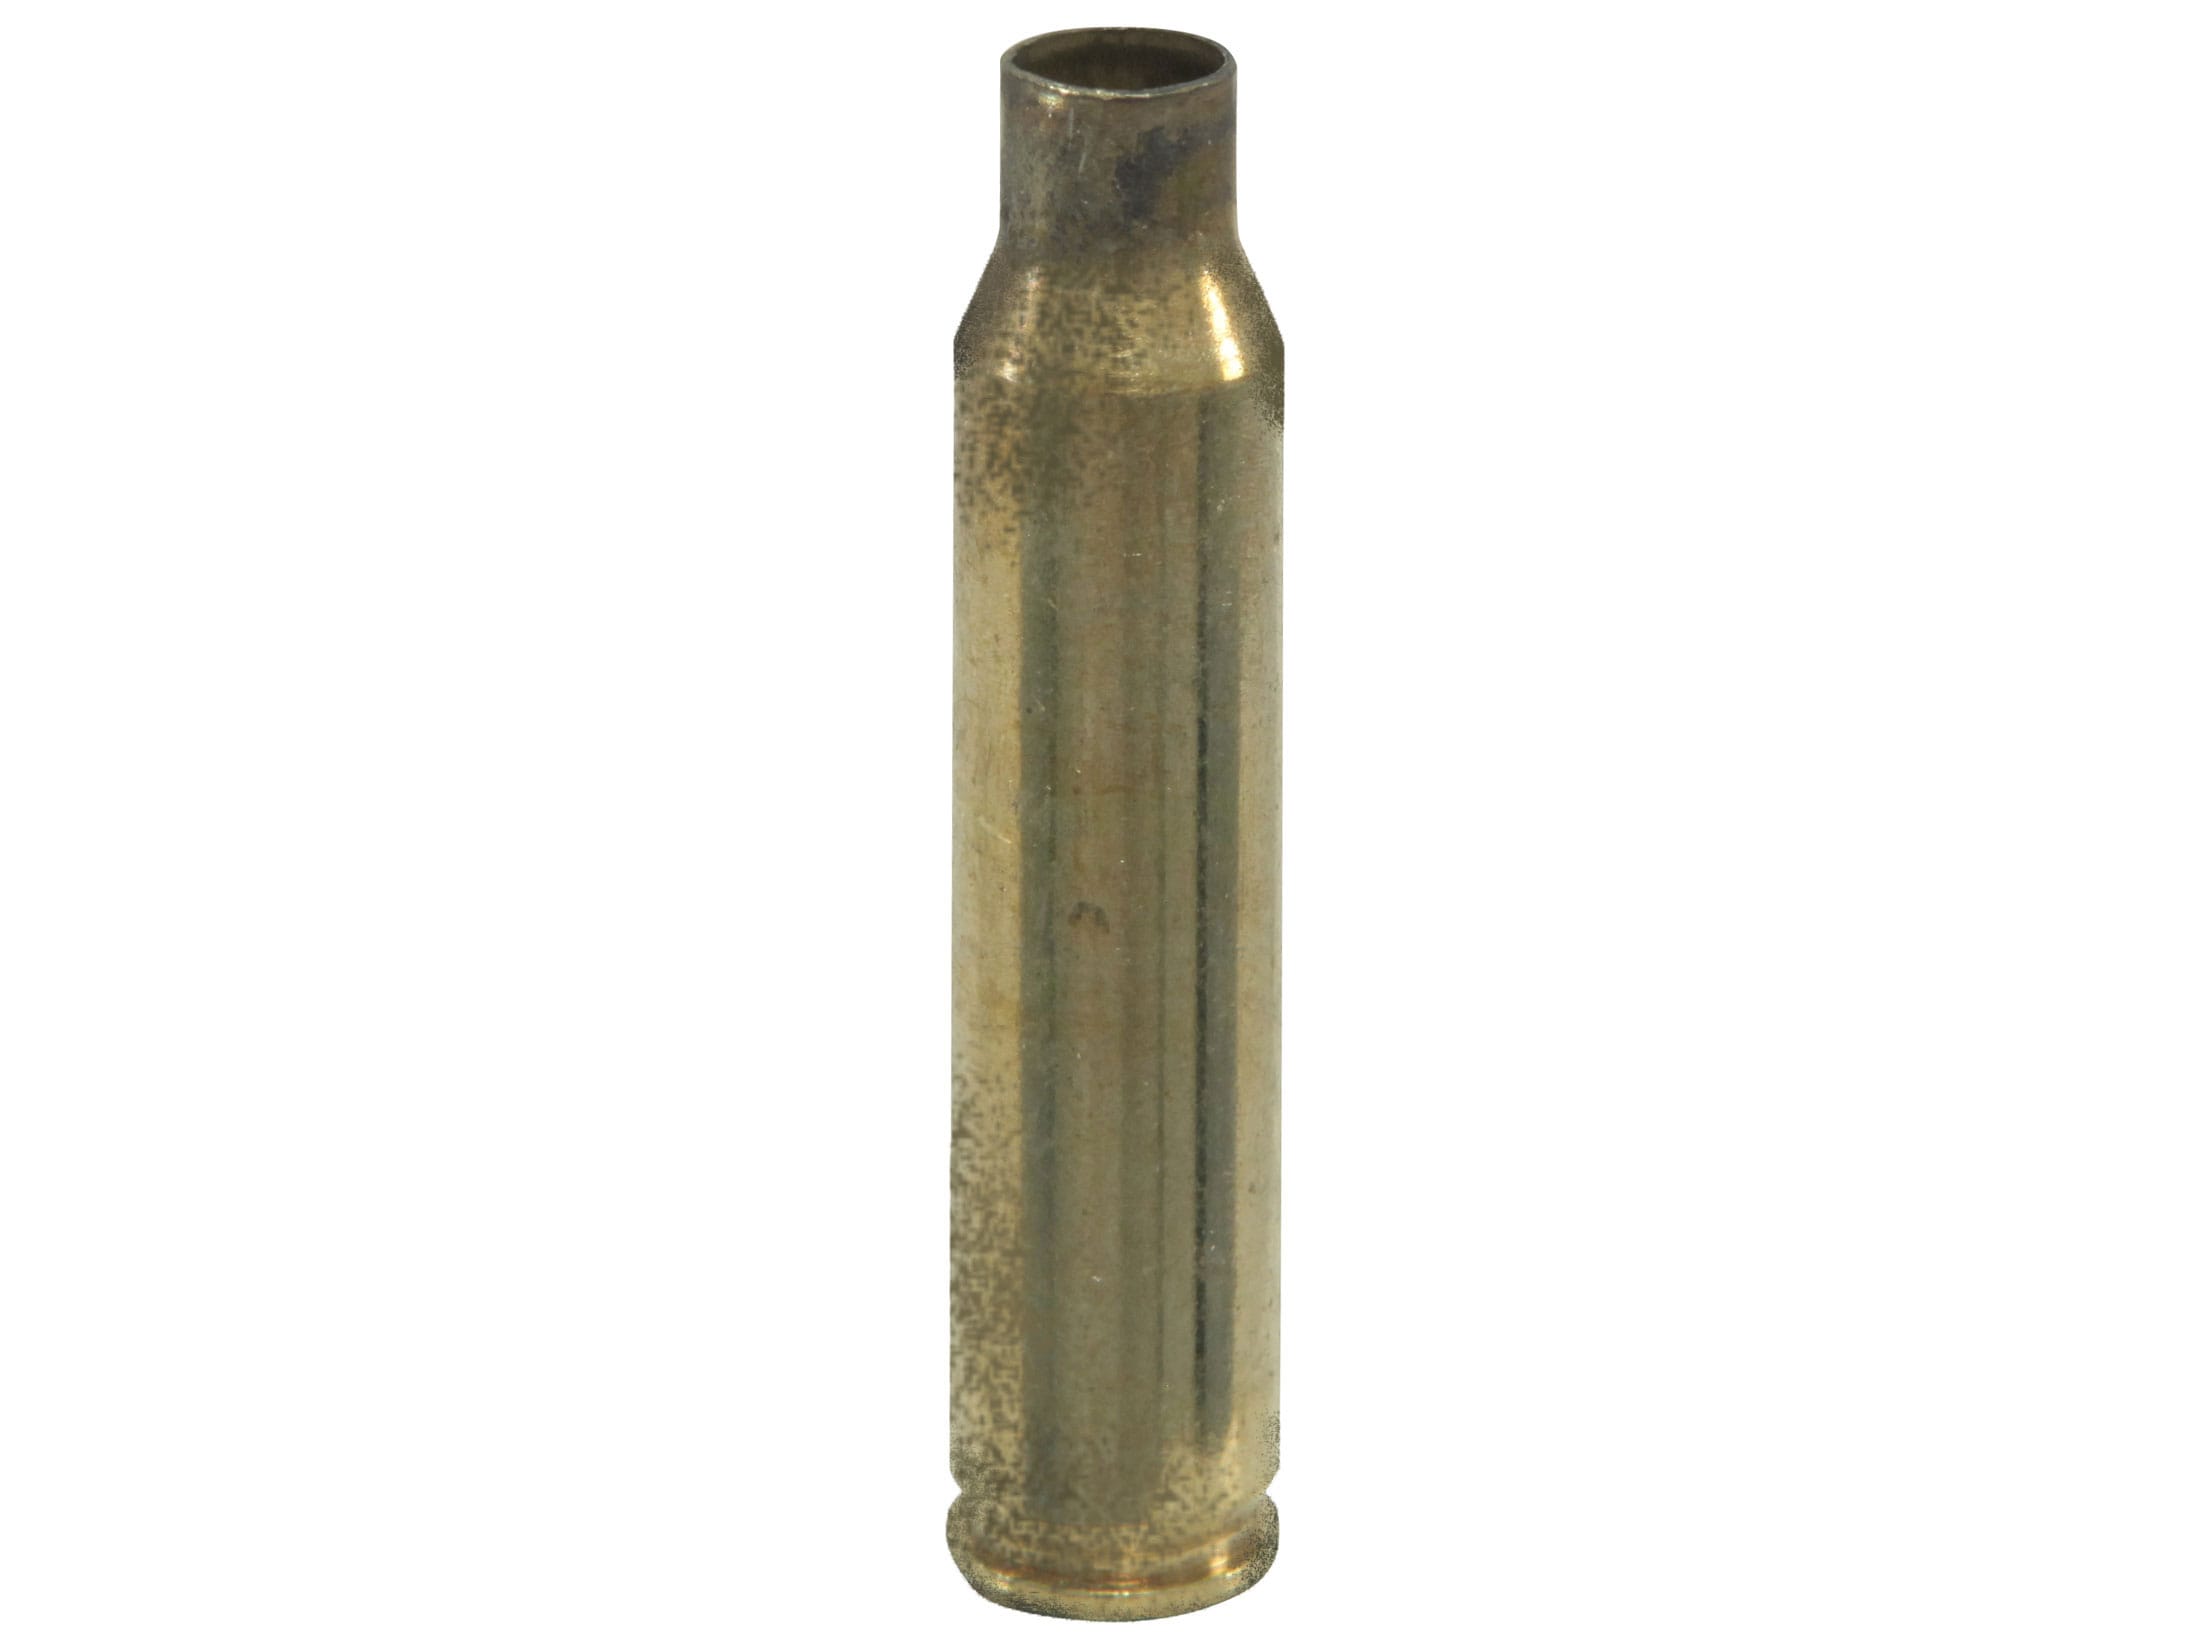 Once-Fired Brass - 9mm, Cartridge Cases, Shooting Stuff